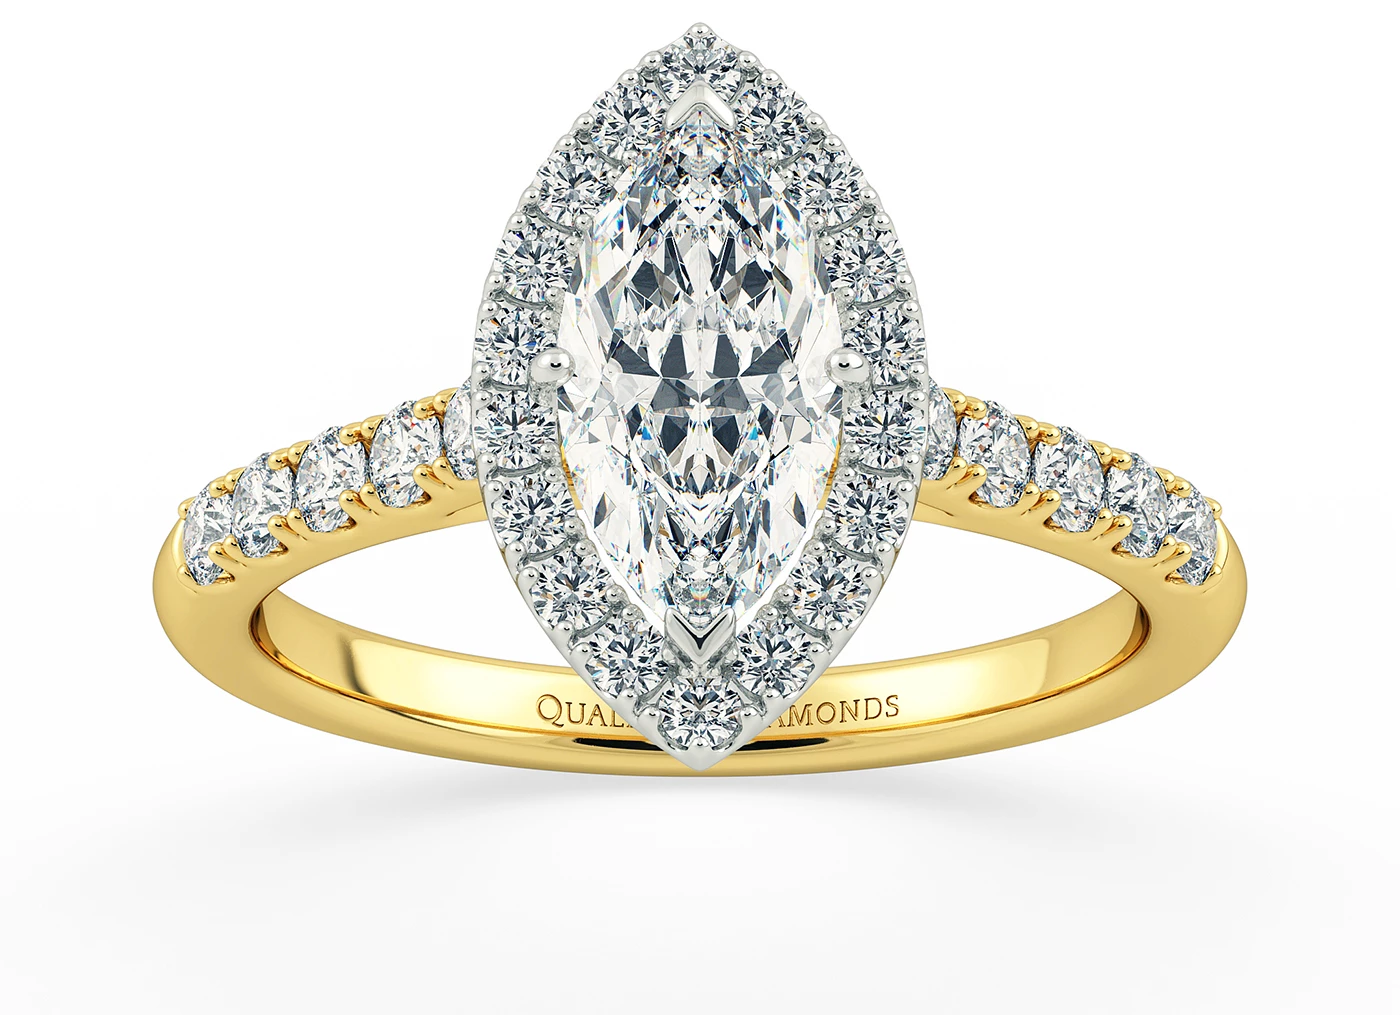 Two Carat Halo Marquise Diamond Ring in 18K Yellow Gold